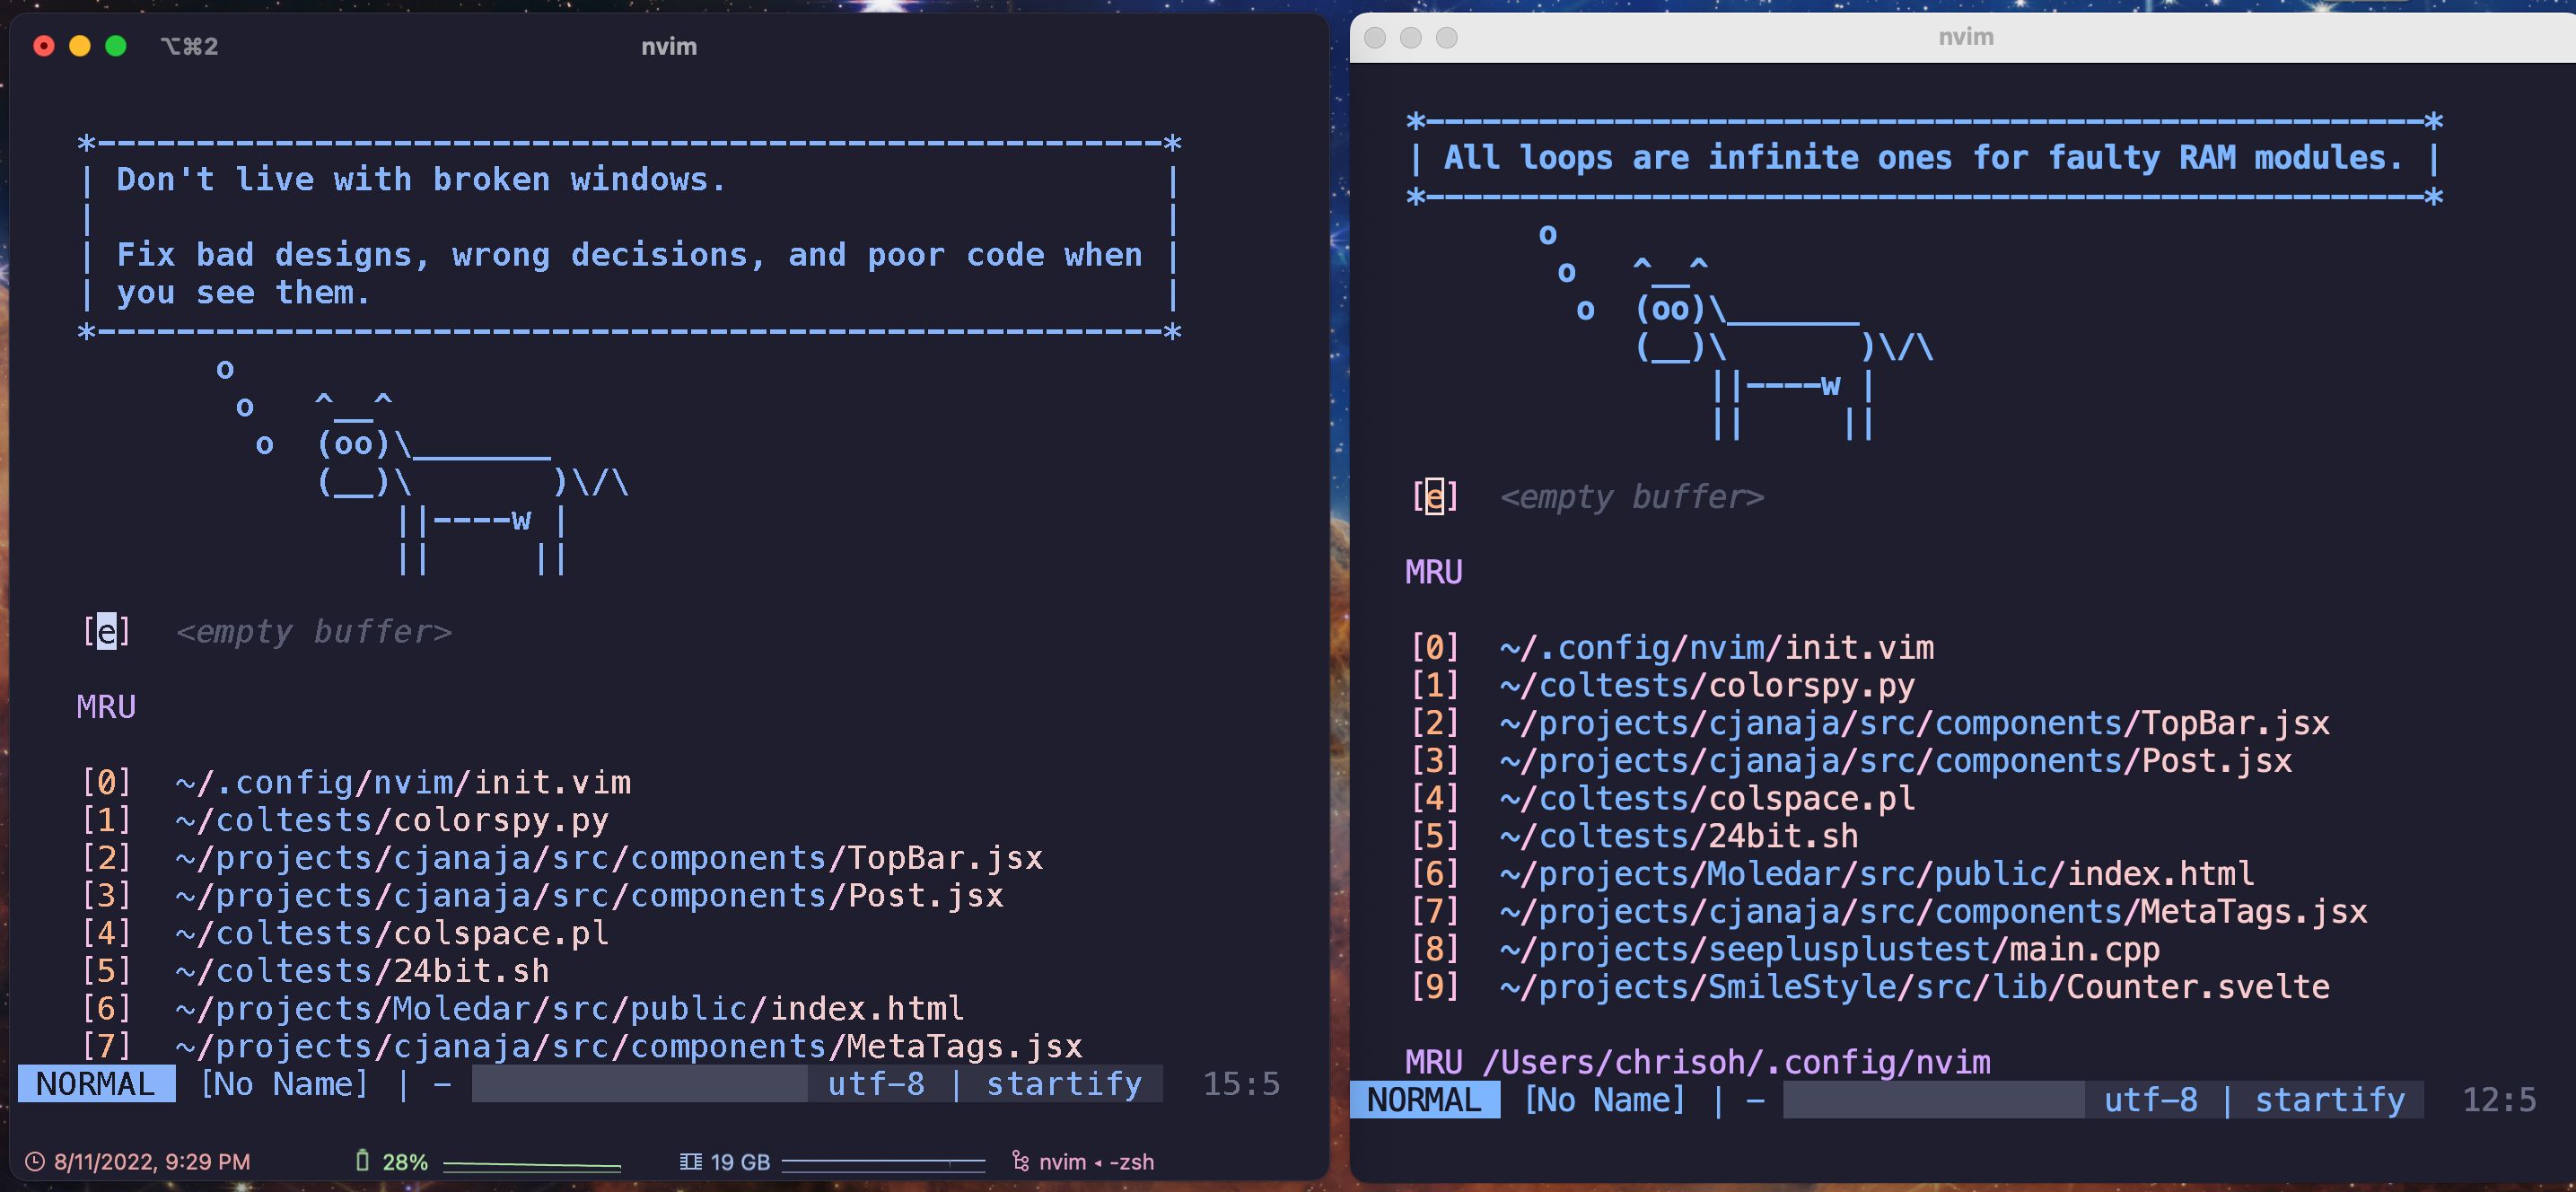 iterm2 and alacritty being very close in color matching